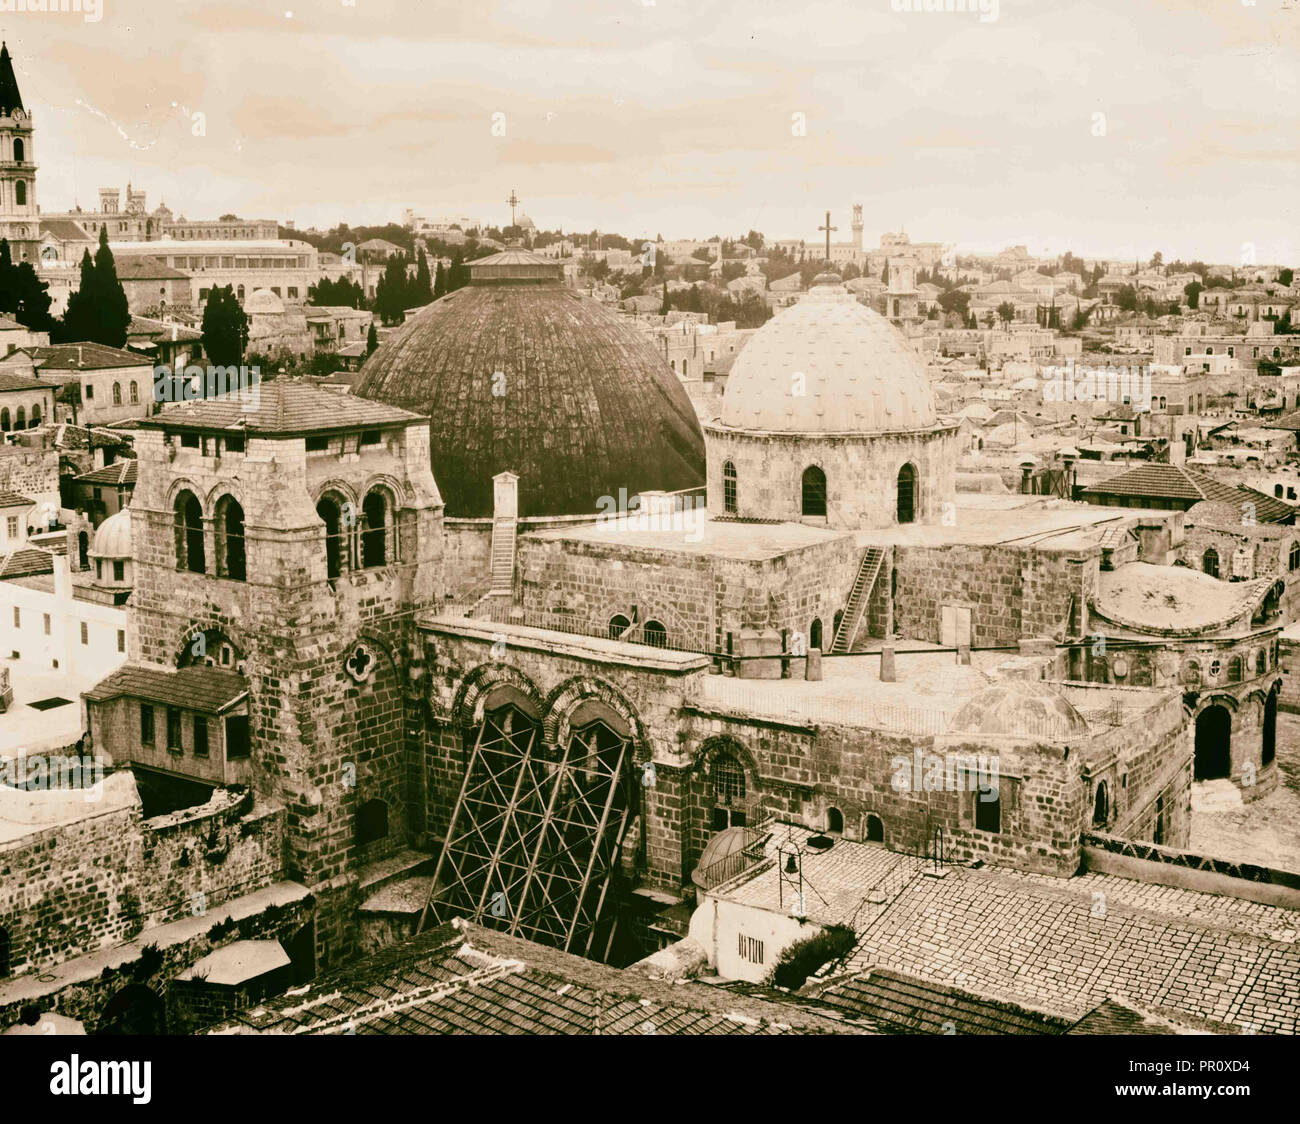 Church of Holy Sepulchre showing the two domes. 1950, Jerusalem, Israel Stock Photo